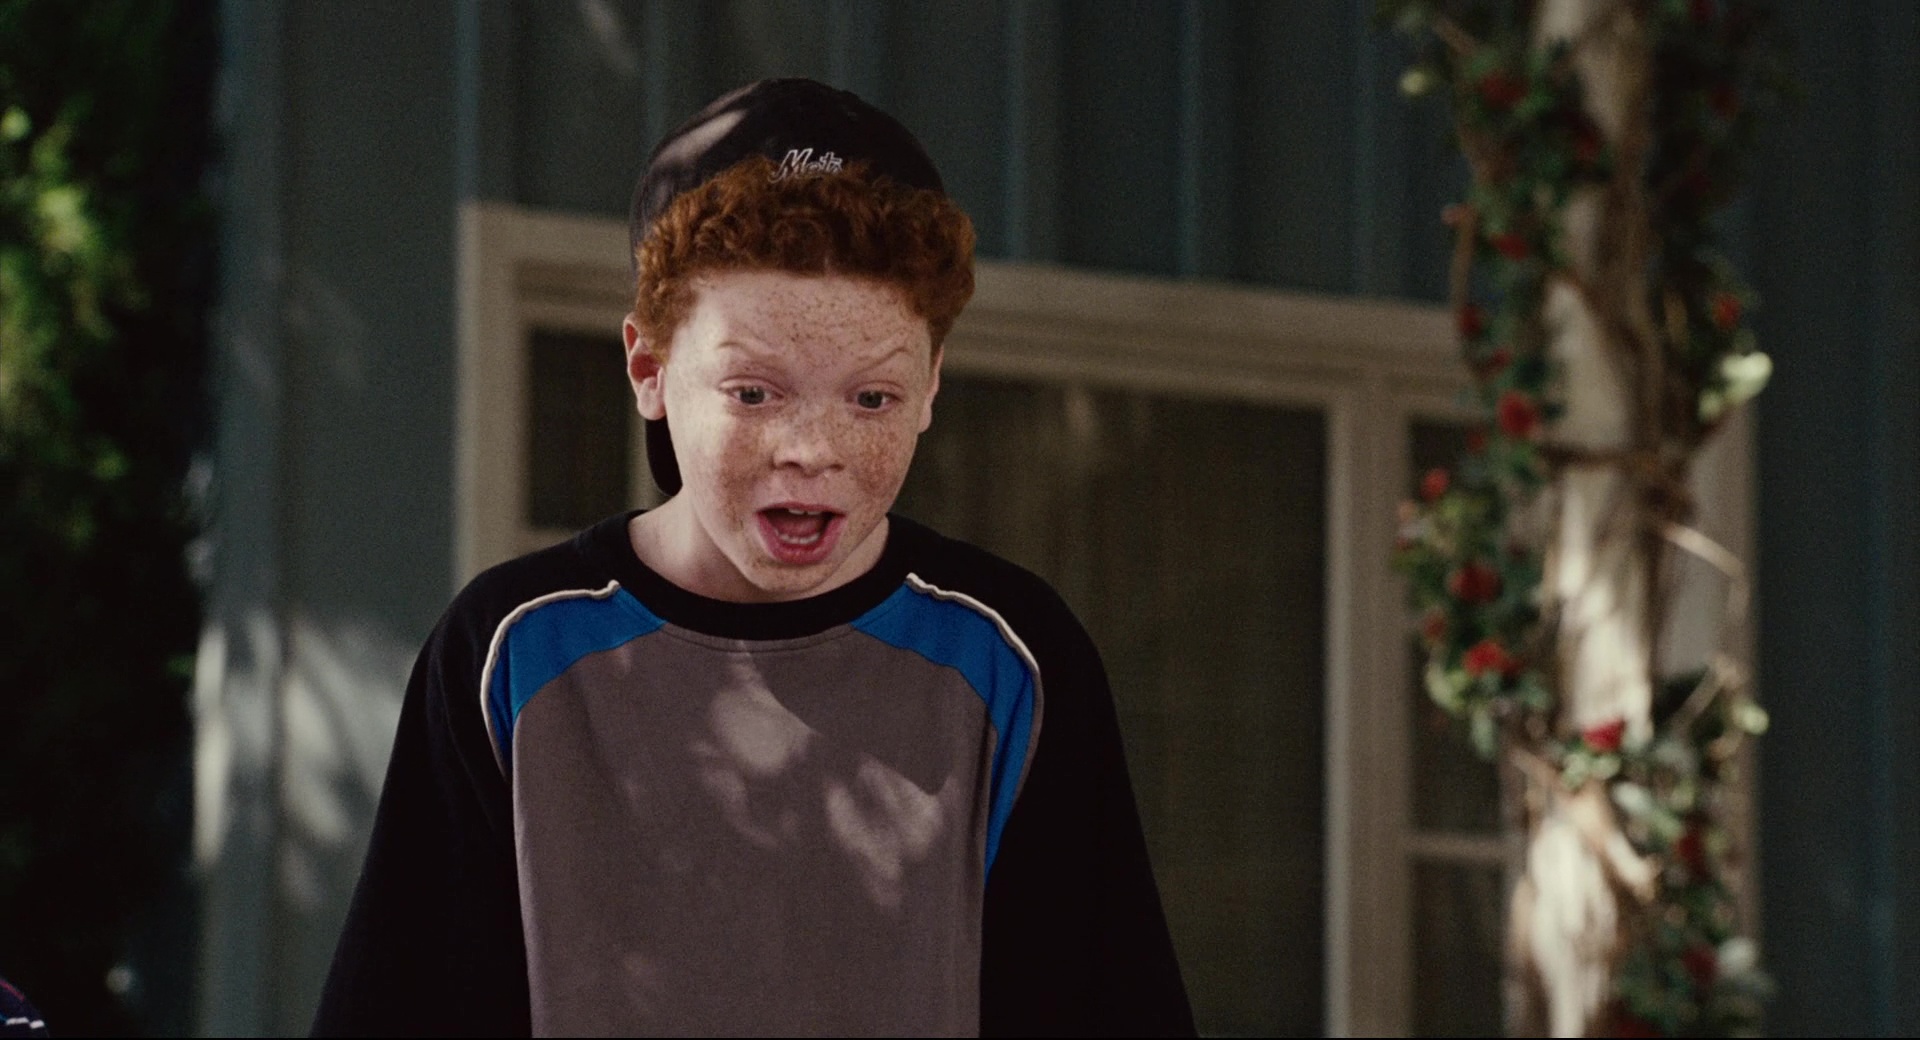 New York Mets Cap Worn By Cameron Monaghan In Click (2006)